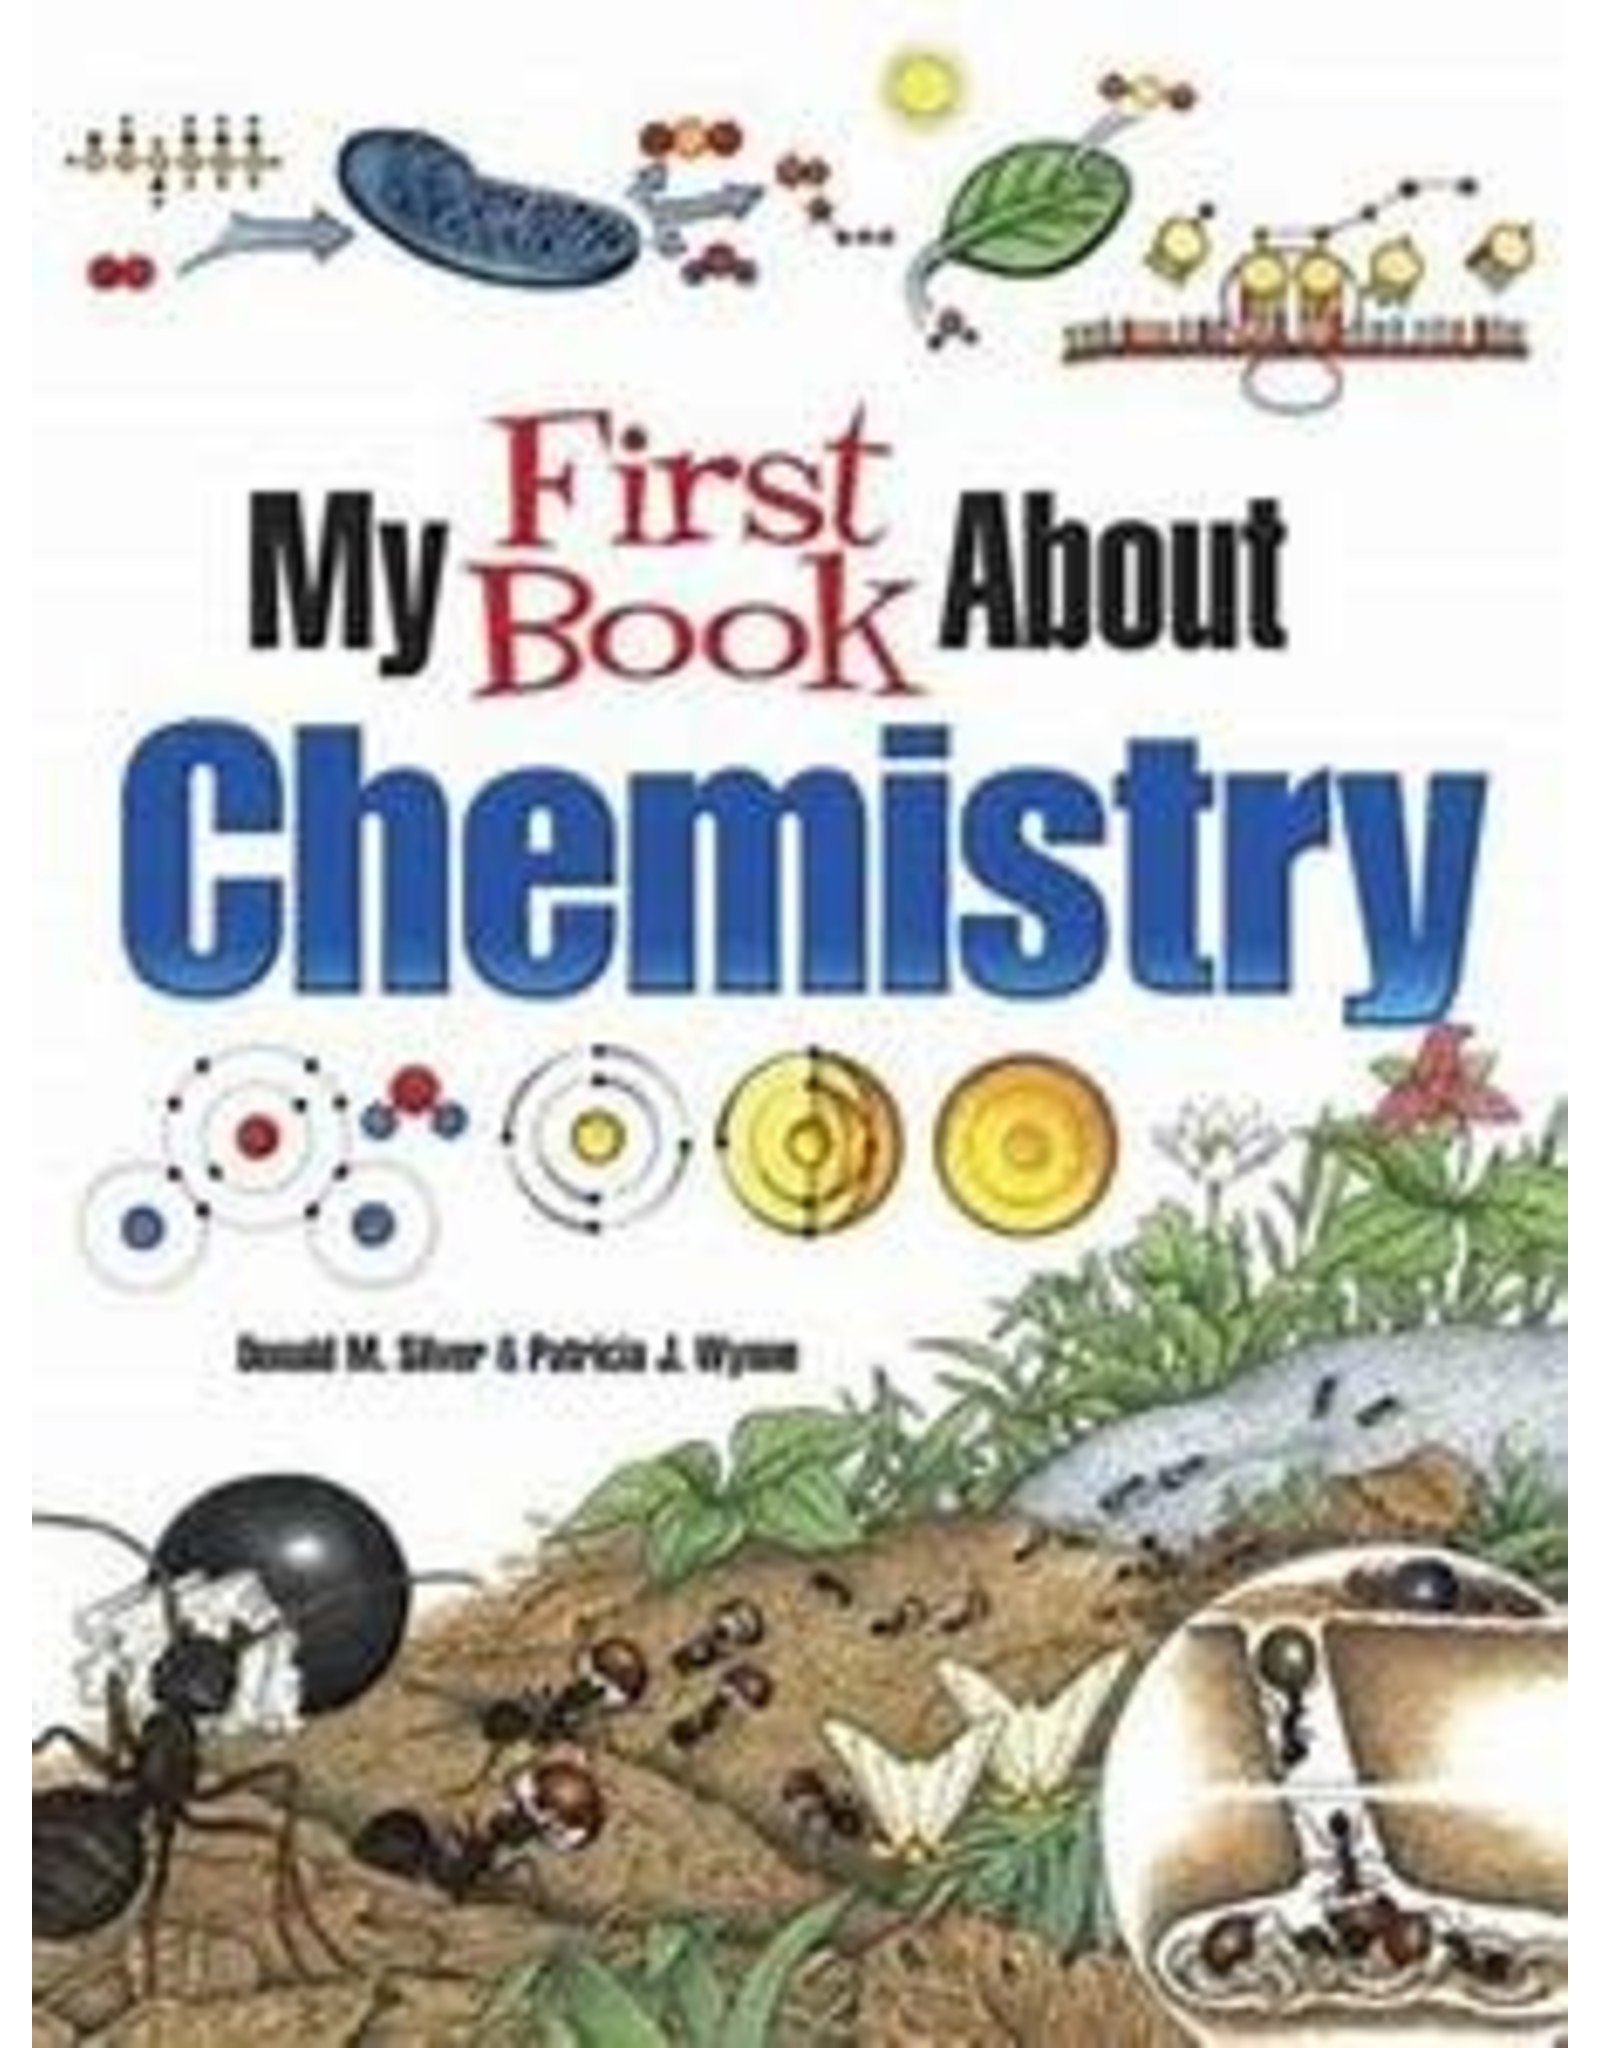 My First Book About Chemistry - Patricia J. Wynne and Donald M. Silver